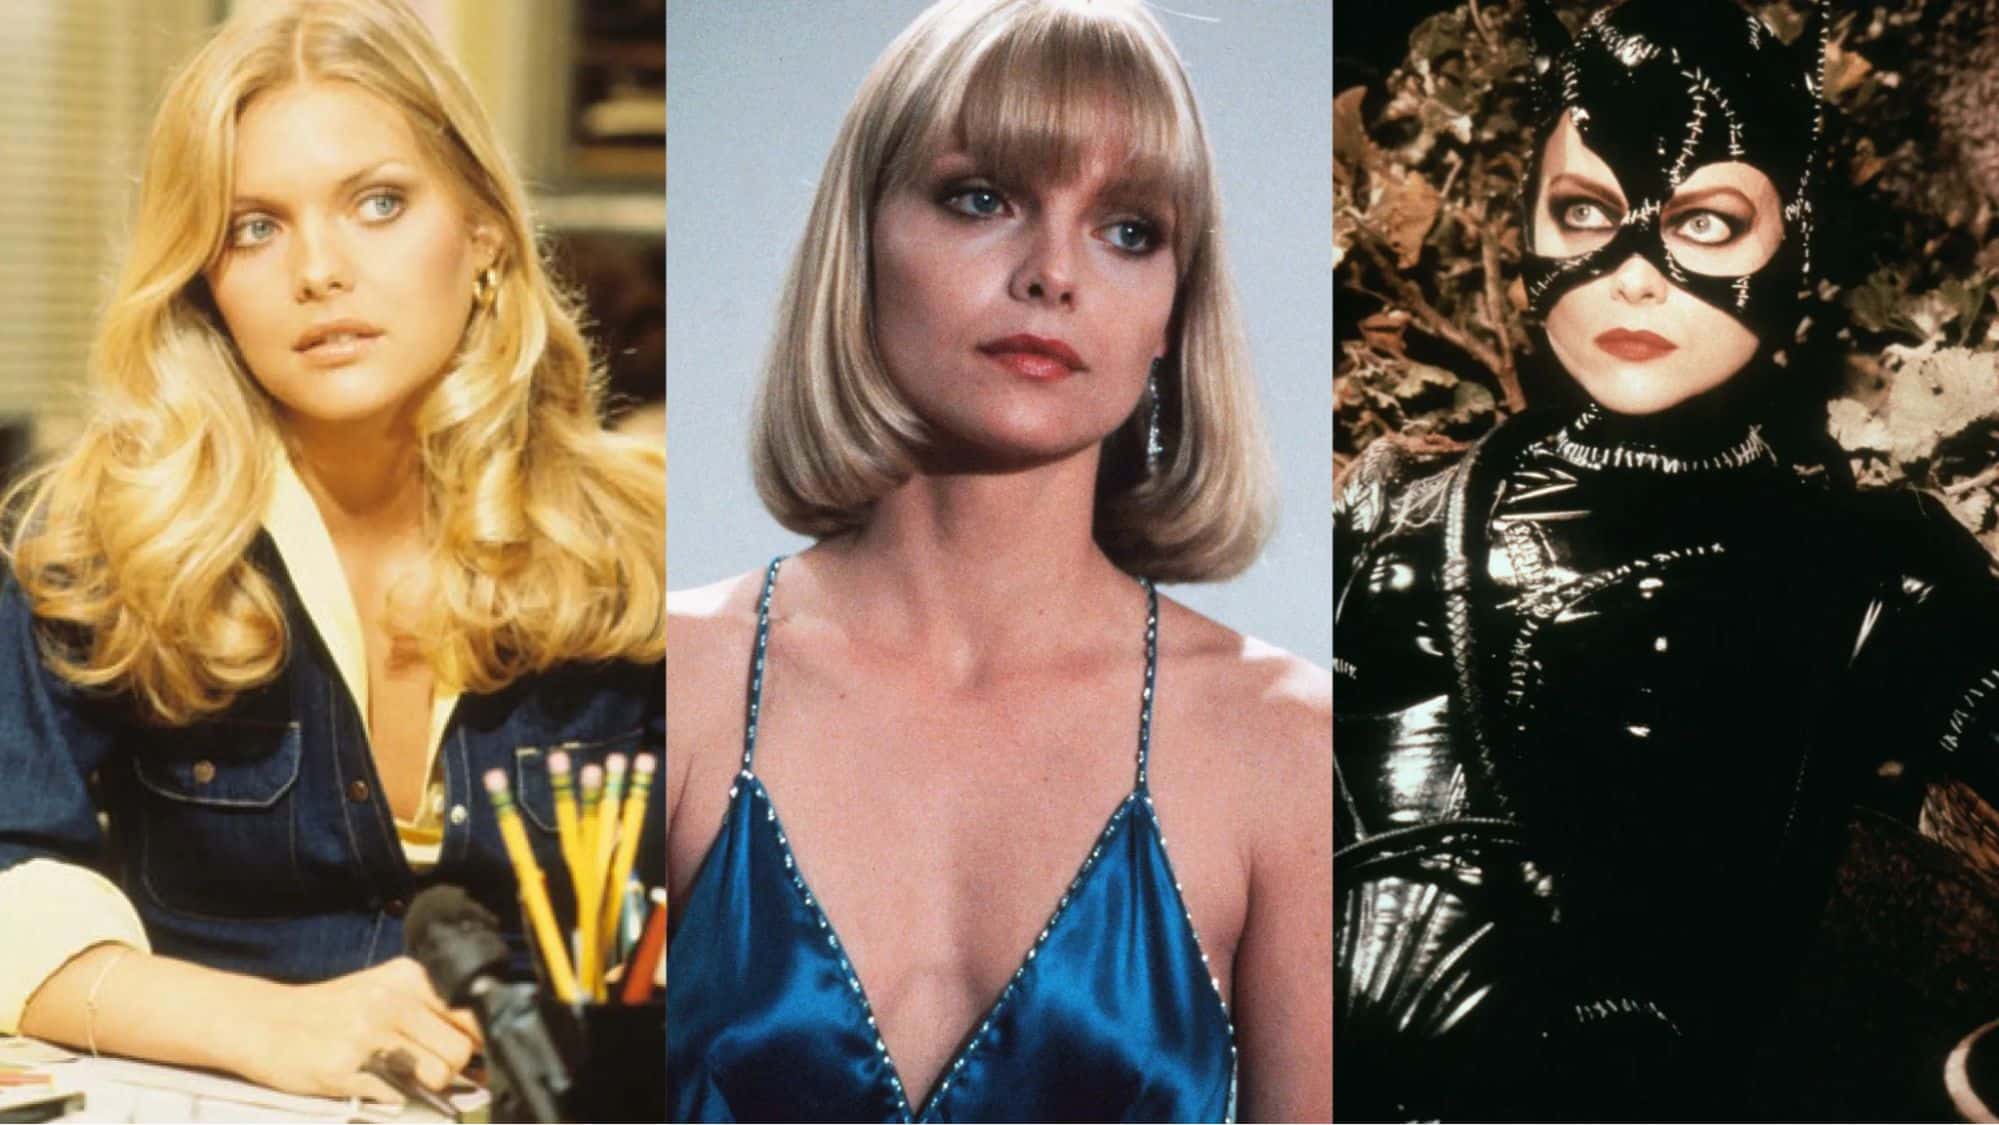 Michelle Pfeiffer in her acting career